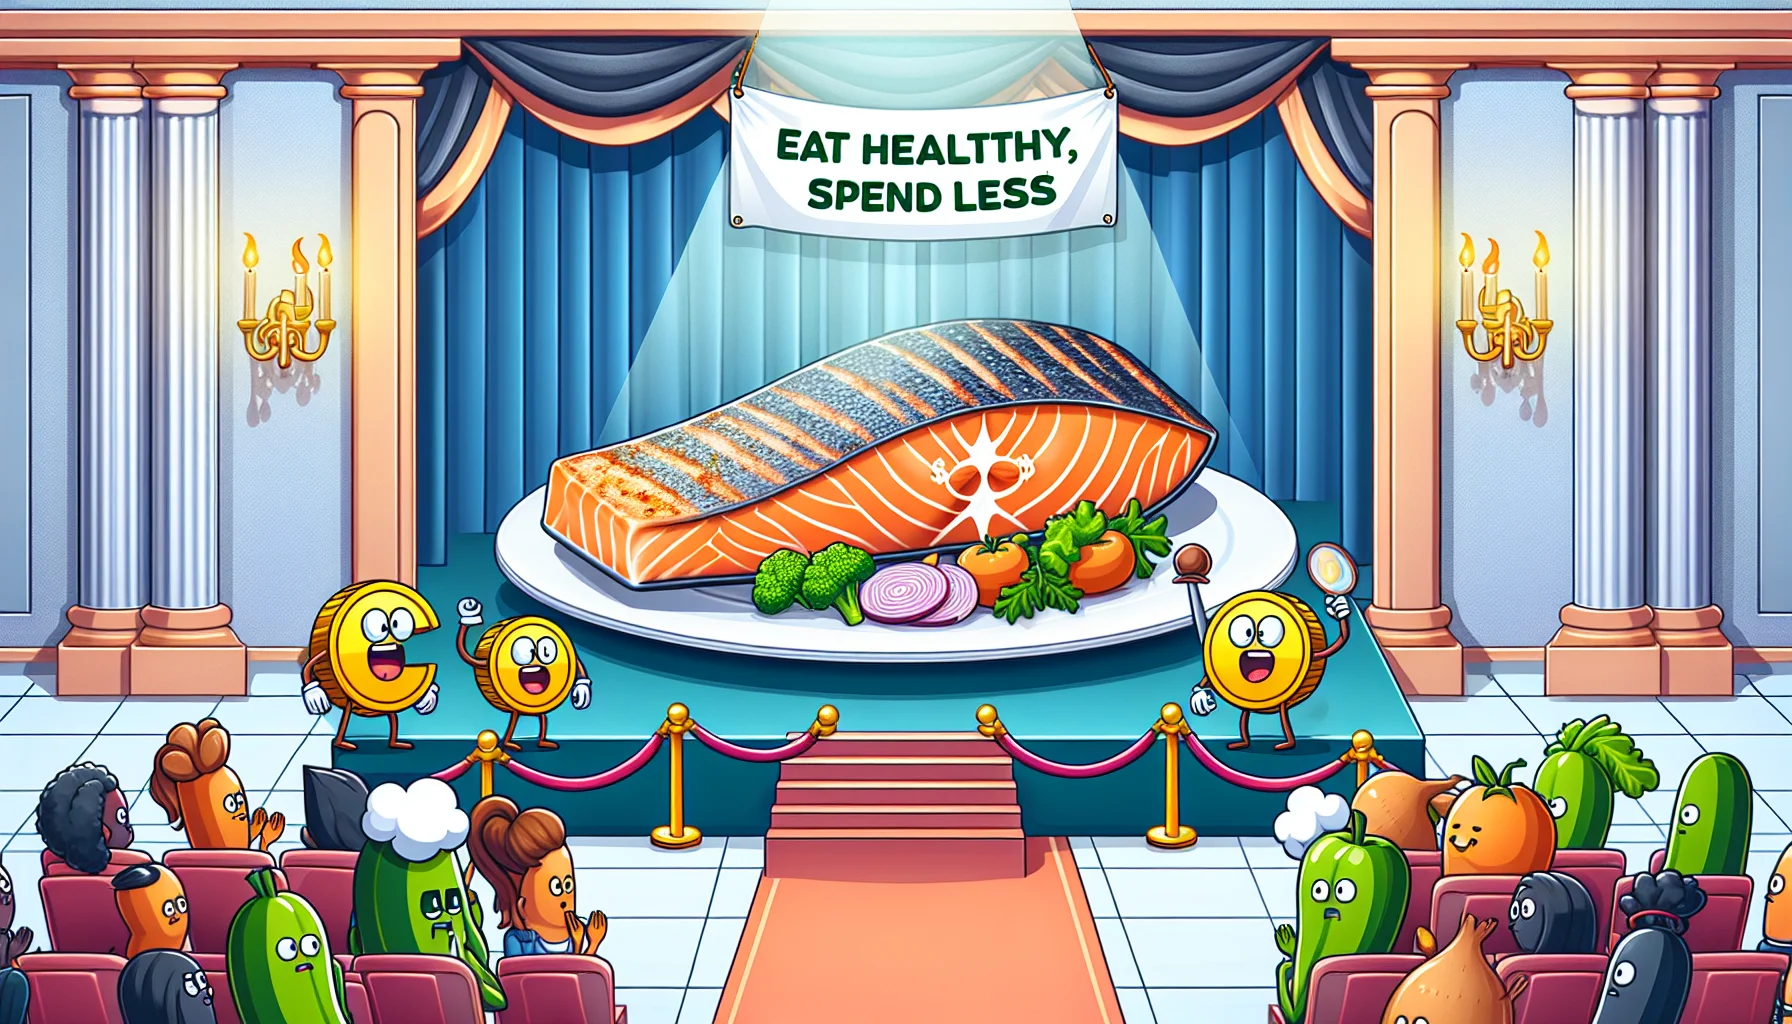 Create an image of an amusing situation where a perfectly roasted piece of salmon, cooked at 400 degrees, is being showcased on a grand stage. The stage is set in a posh dining room and there's a banner in the background that reads 'Eat Healthy, Spend Less'. There are cartoon-like dollar signs hesitating near the salmon but being lured in by the scent, essentially personifying budget-conscious folks. Alongside there could be fruits and veggies, all cheering on the salmon, contributing to the light-hearted atmosphere encouraging healthy eating within budget.